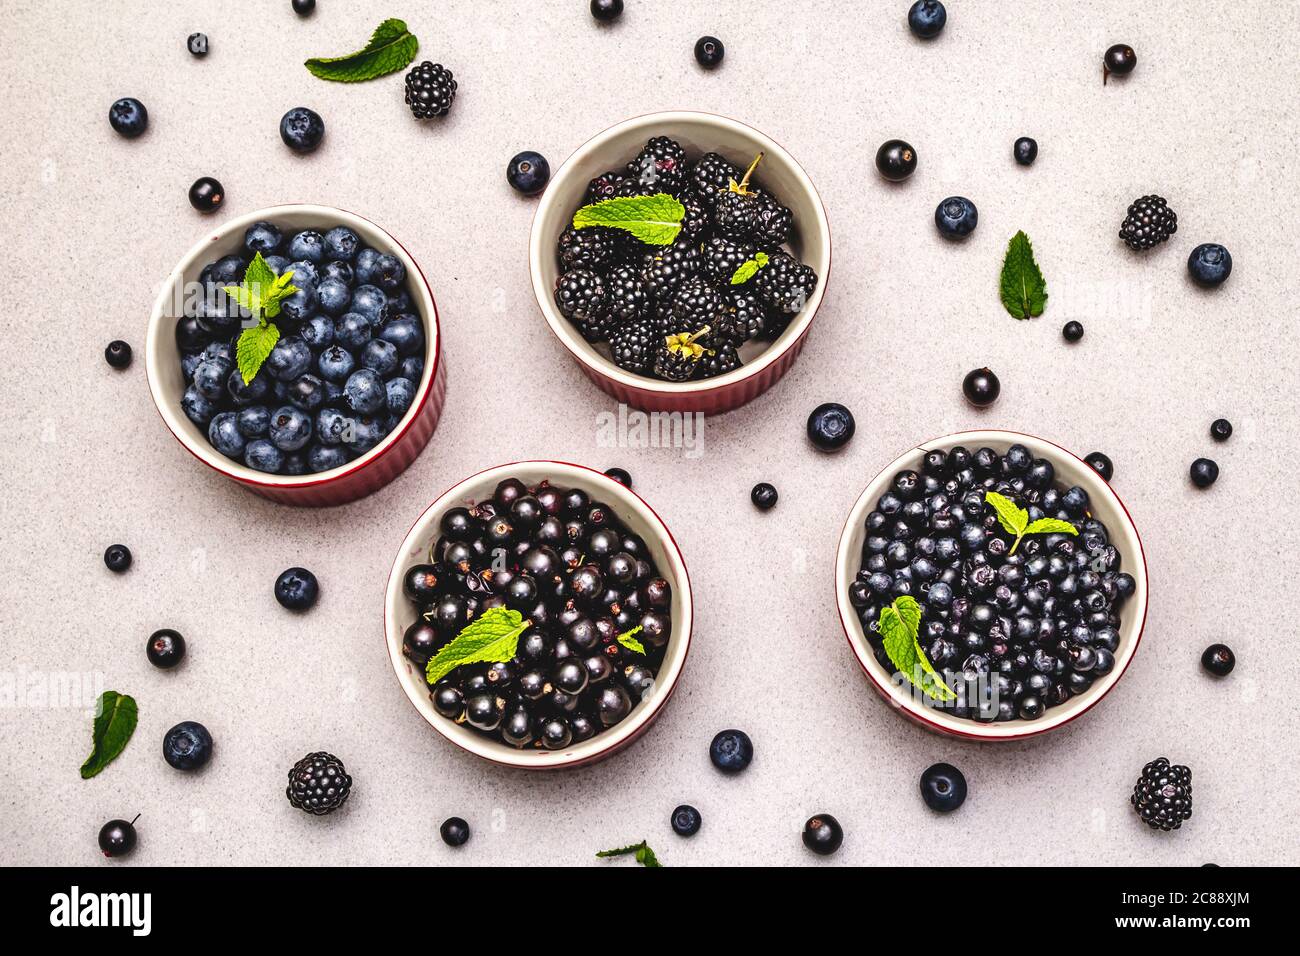 Assorted berries in blue and black colors: bilberry, blueberry, currant and blackberry. Stone concrete background, top view Stock Photo